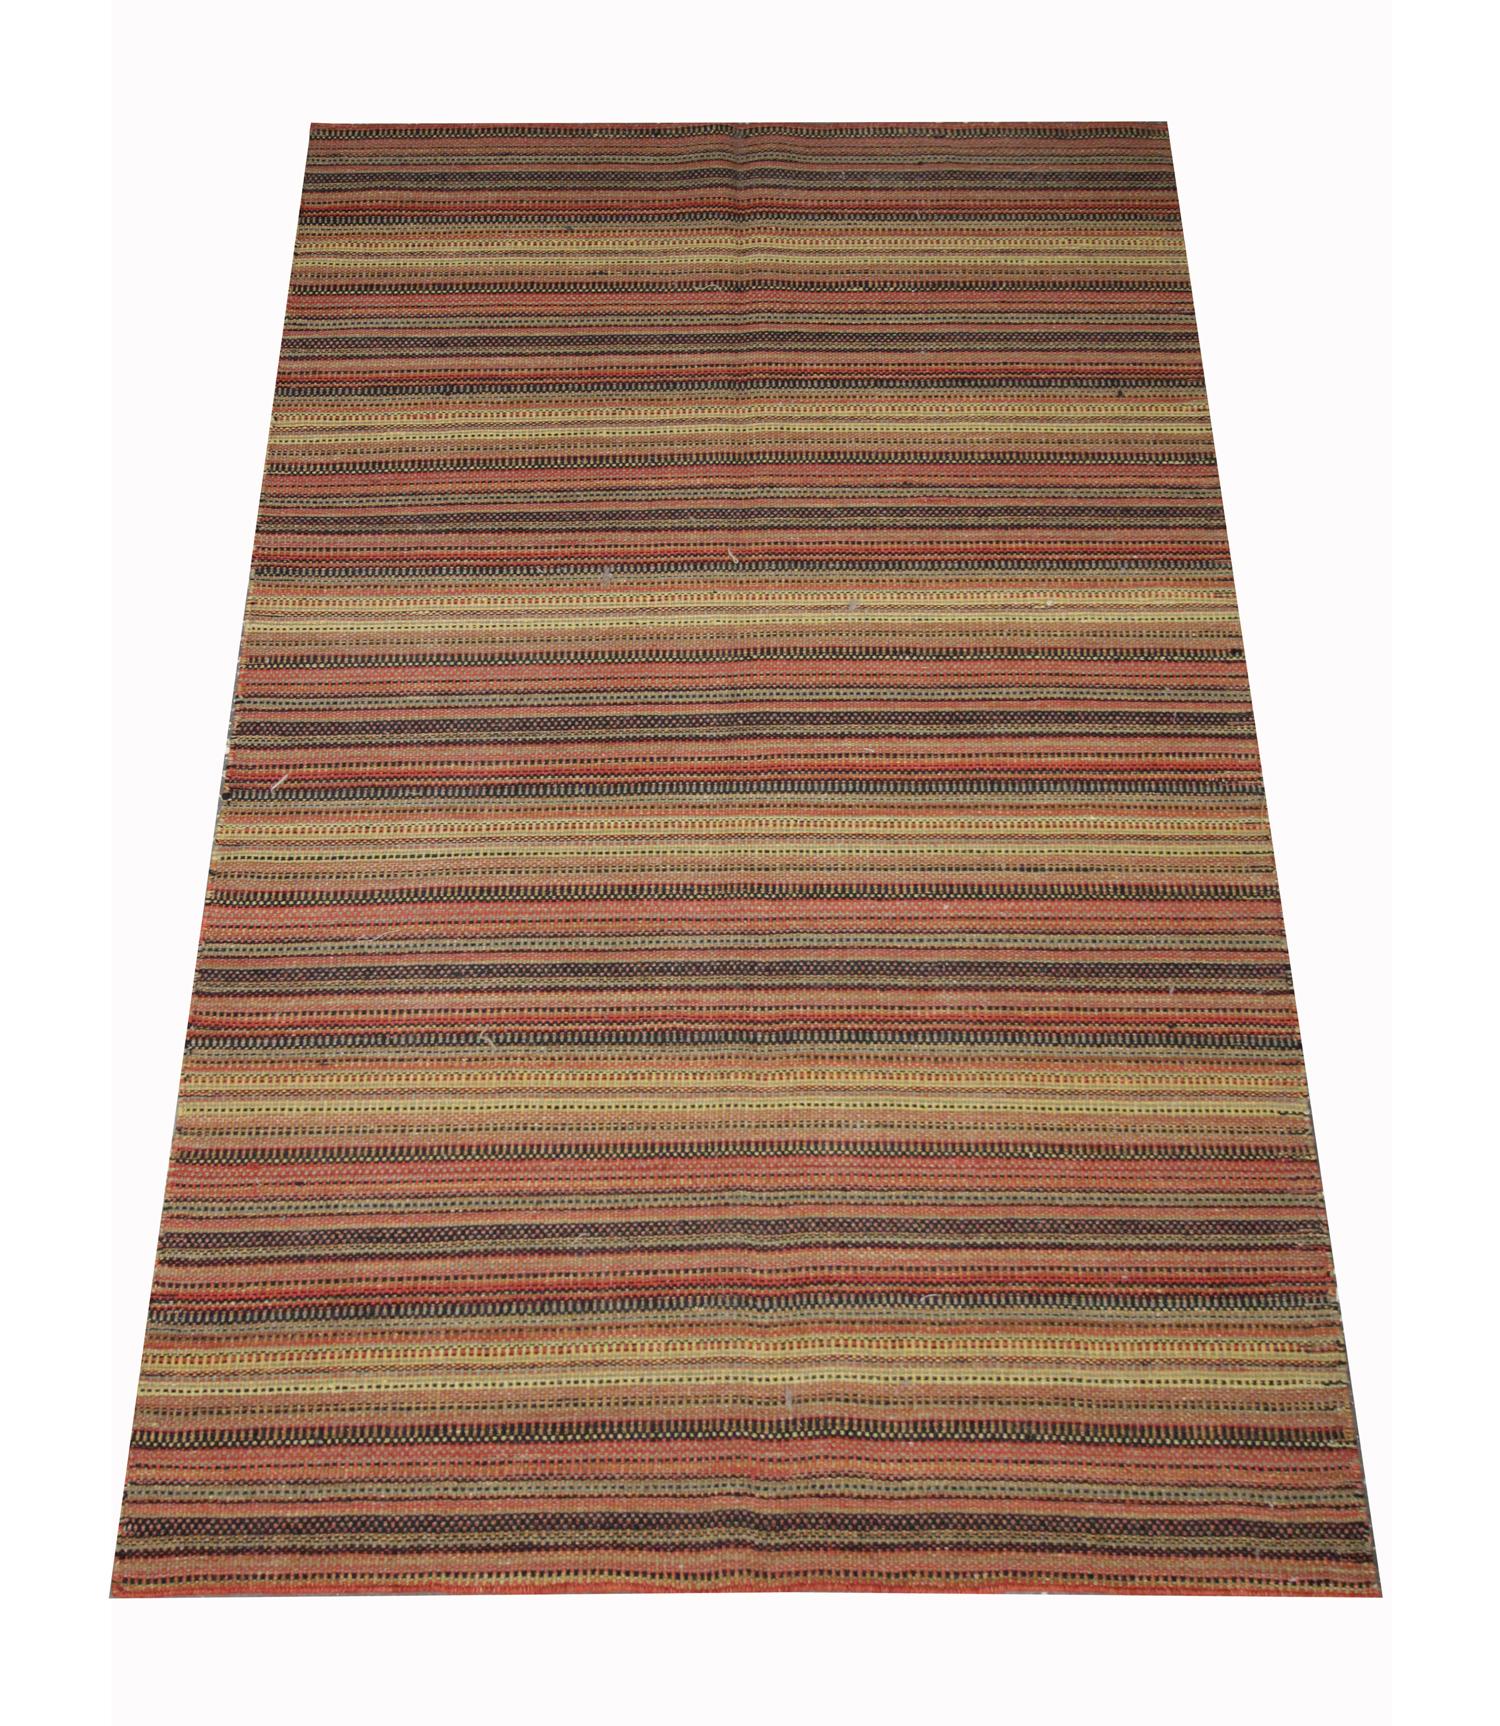 This bold area rug is a flat woven kilim, woven by hand in the early 21st century. The design features a simple stripe pattern woven in accents of beige, red, brown and black. The colour and the design make this piece the perfect accent rug for both